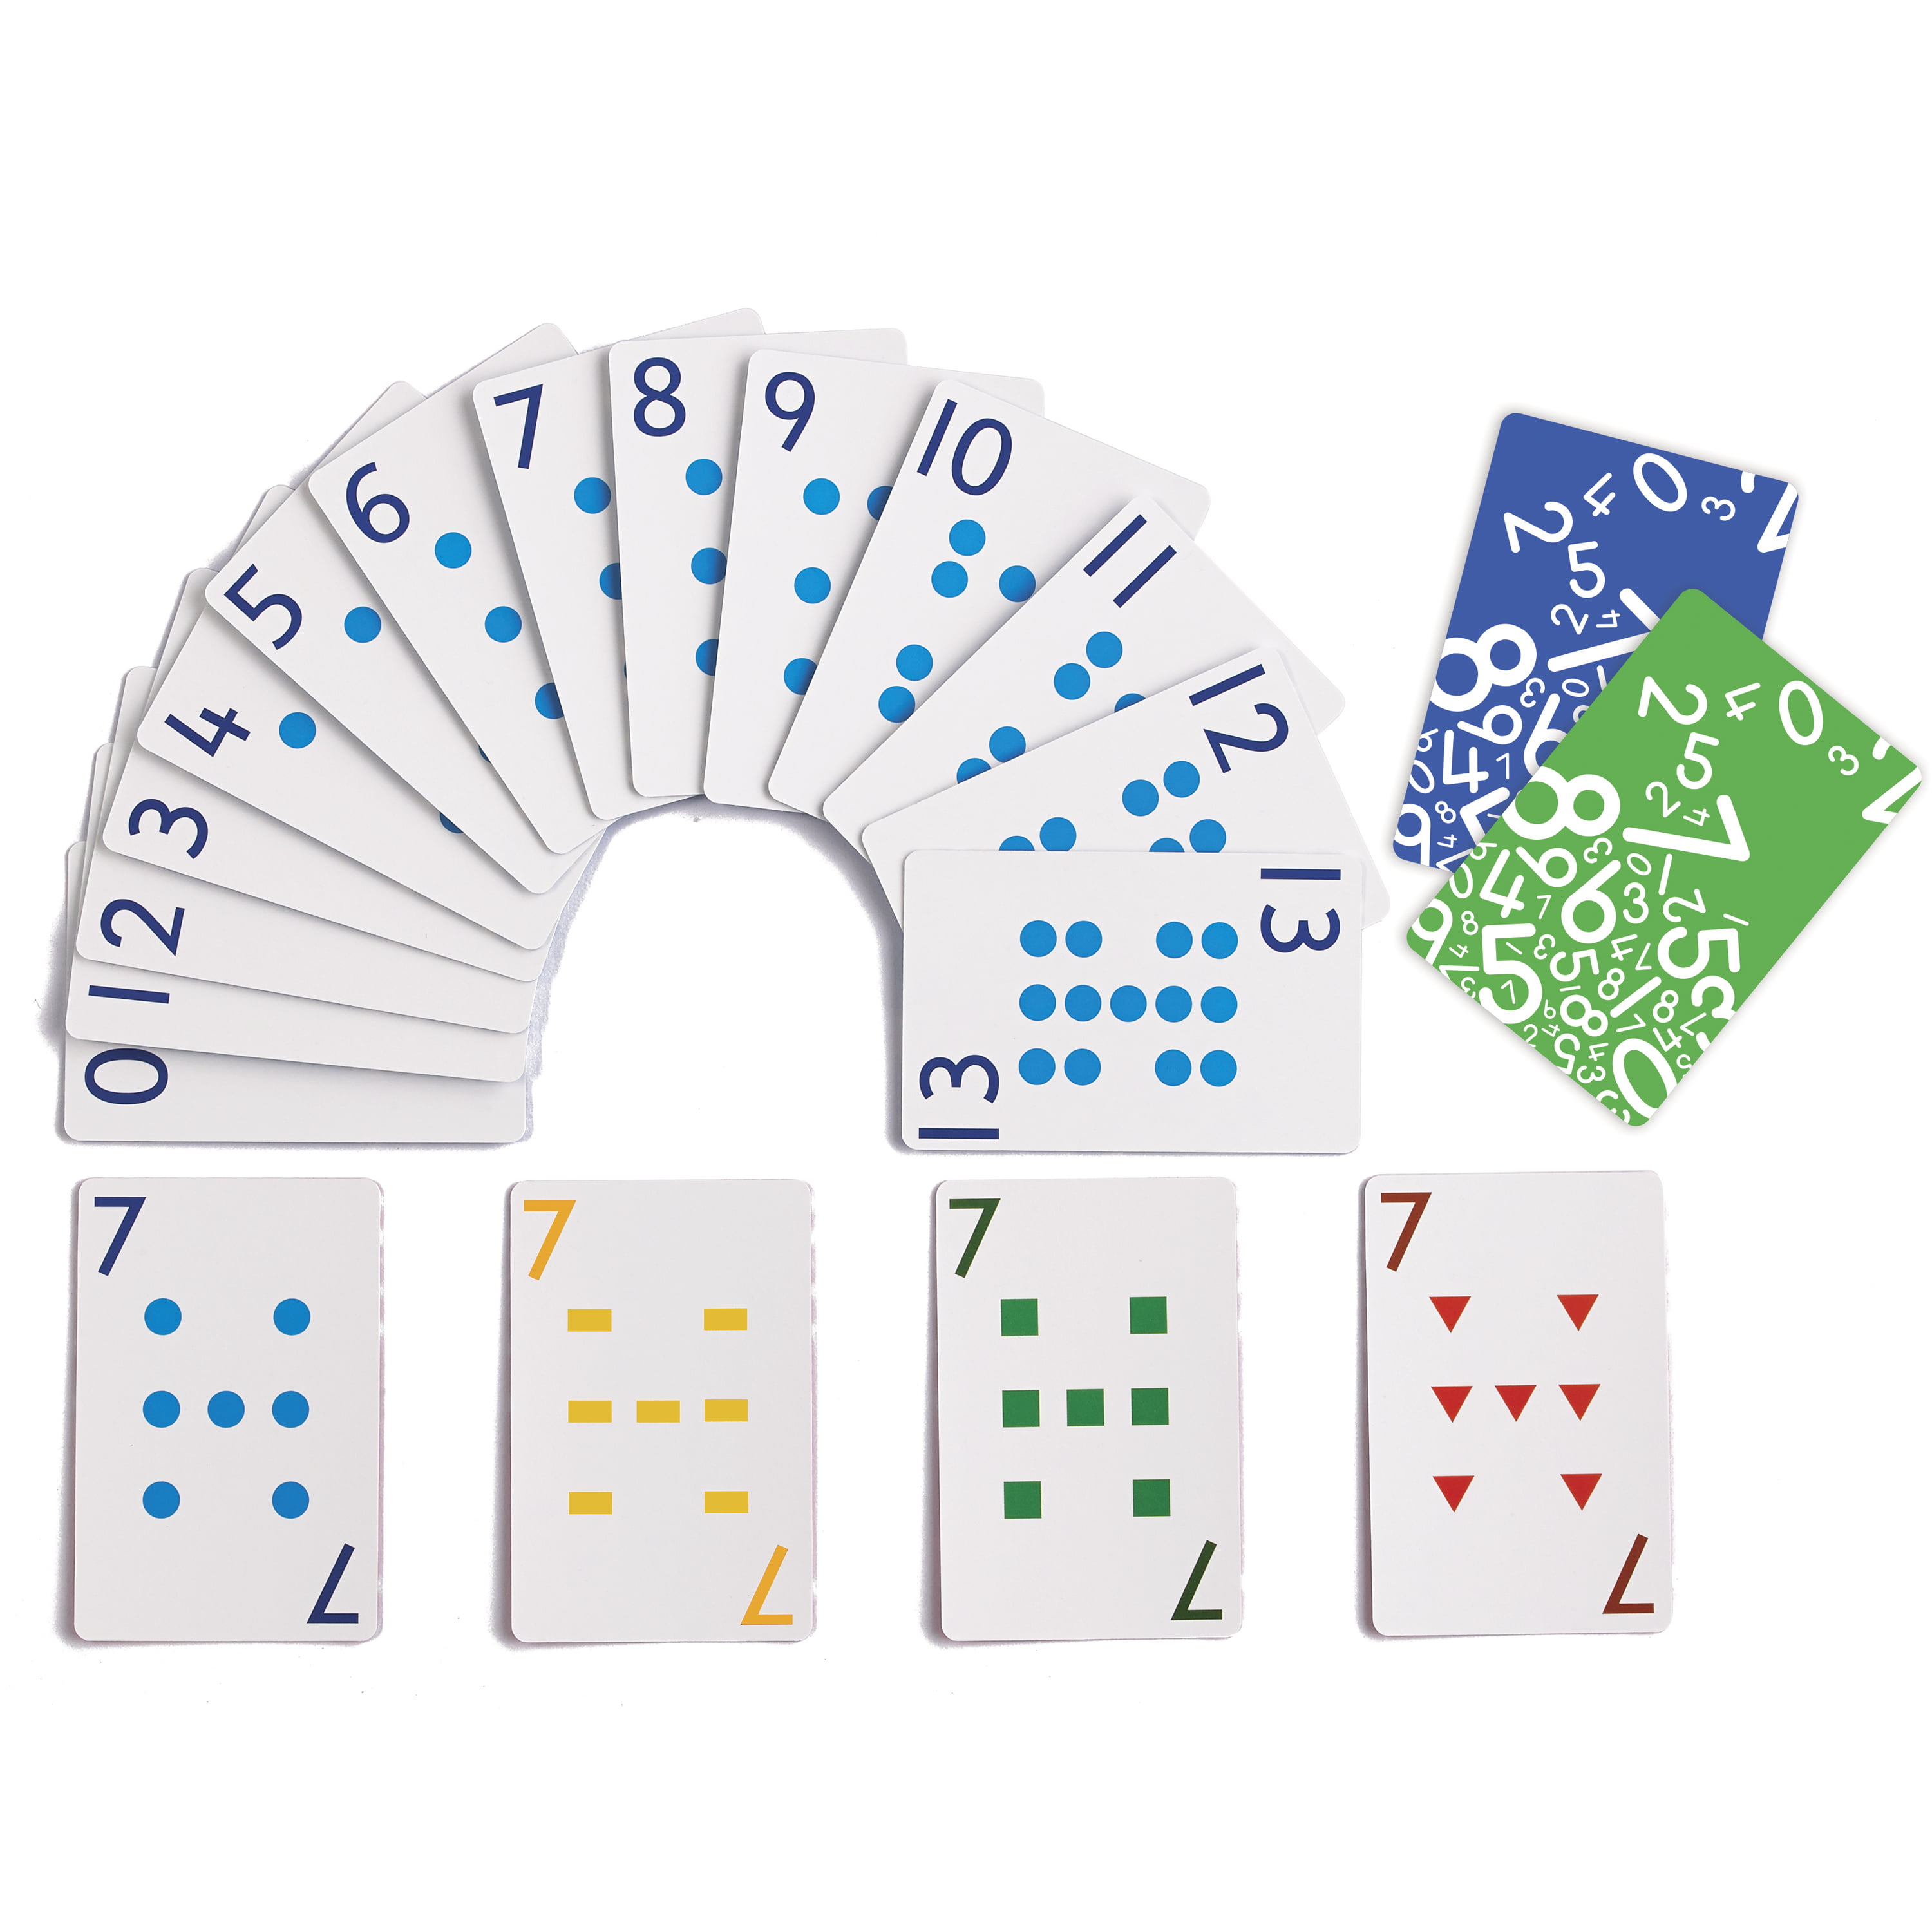 Teach Number Concepts Includes 448 Cards Set of 8 Decks Matching and Probability Counting Multicolored Patterned Cards Numbered 0-13 for Gameplay edx Education School Friendly Playing Cards 